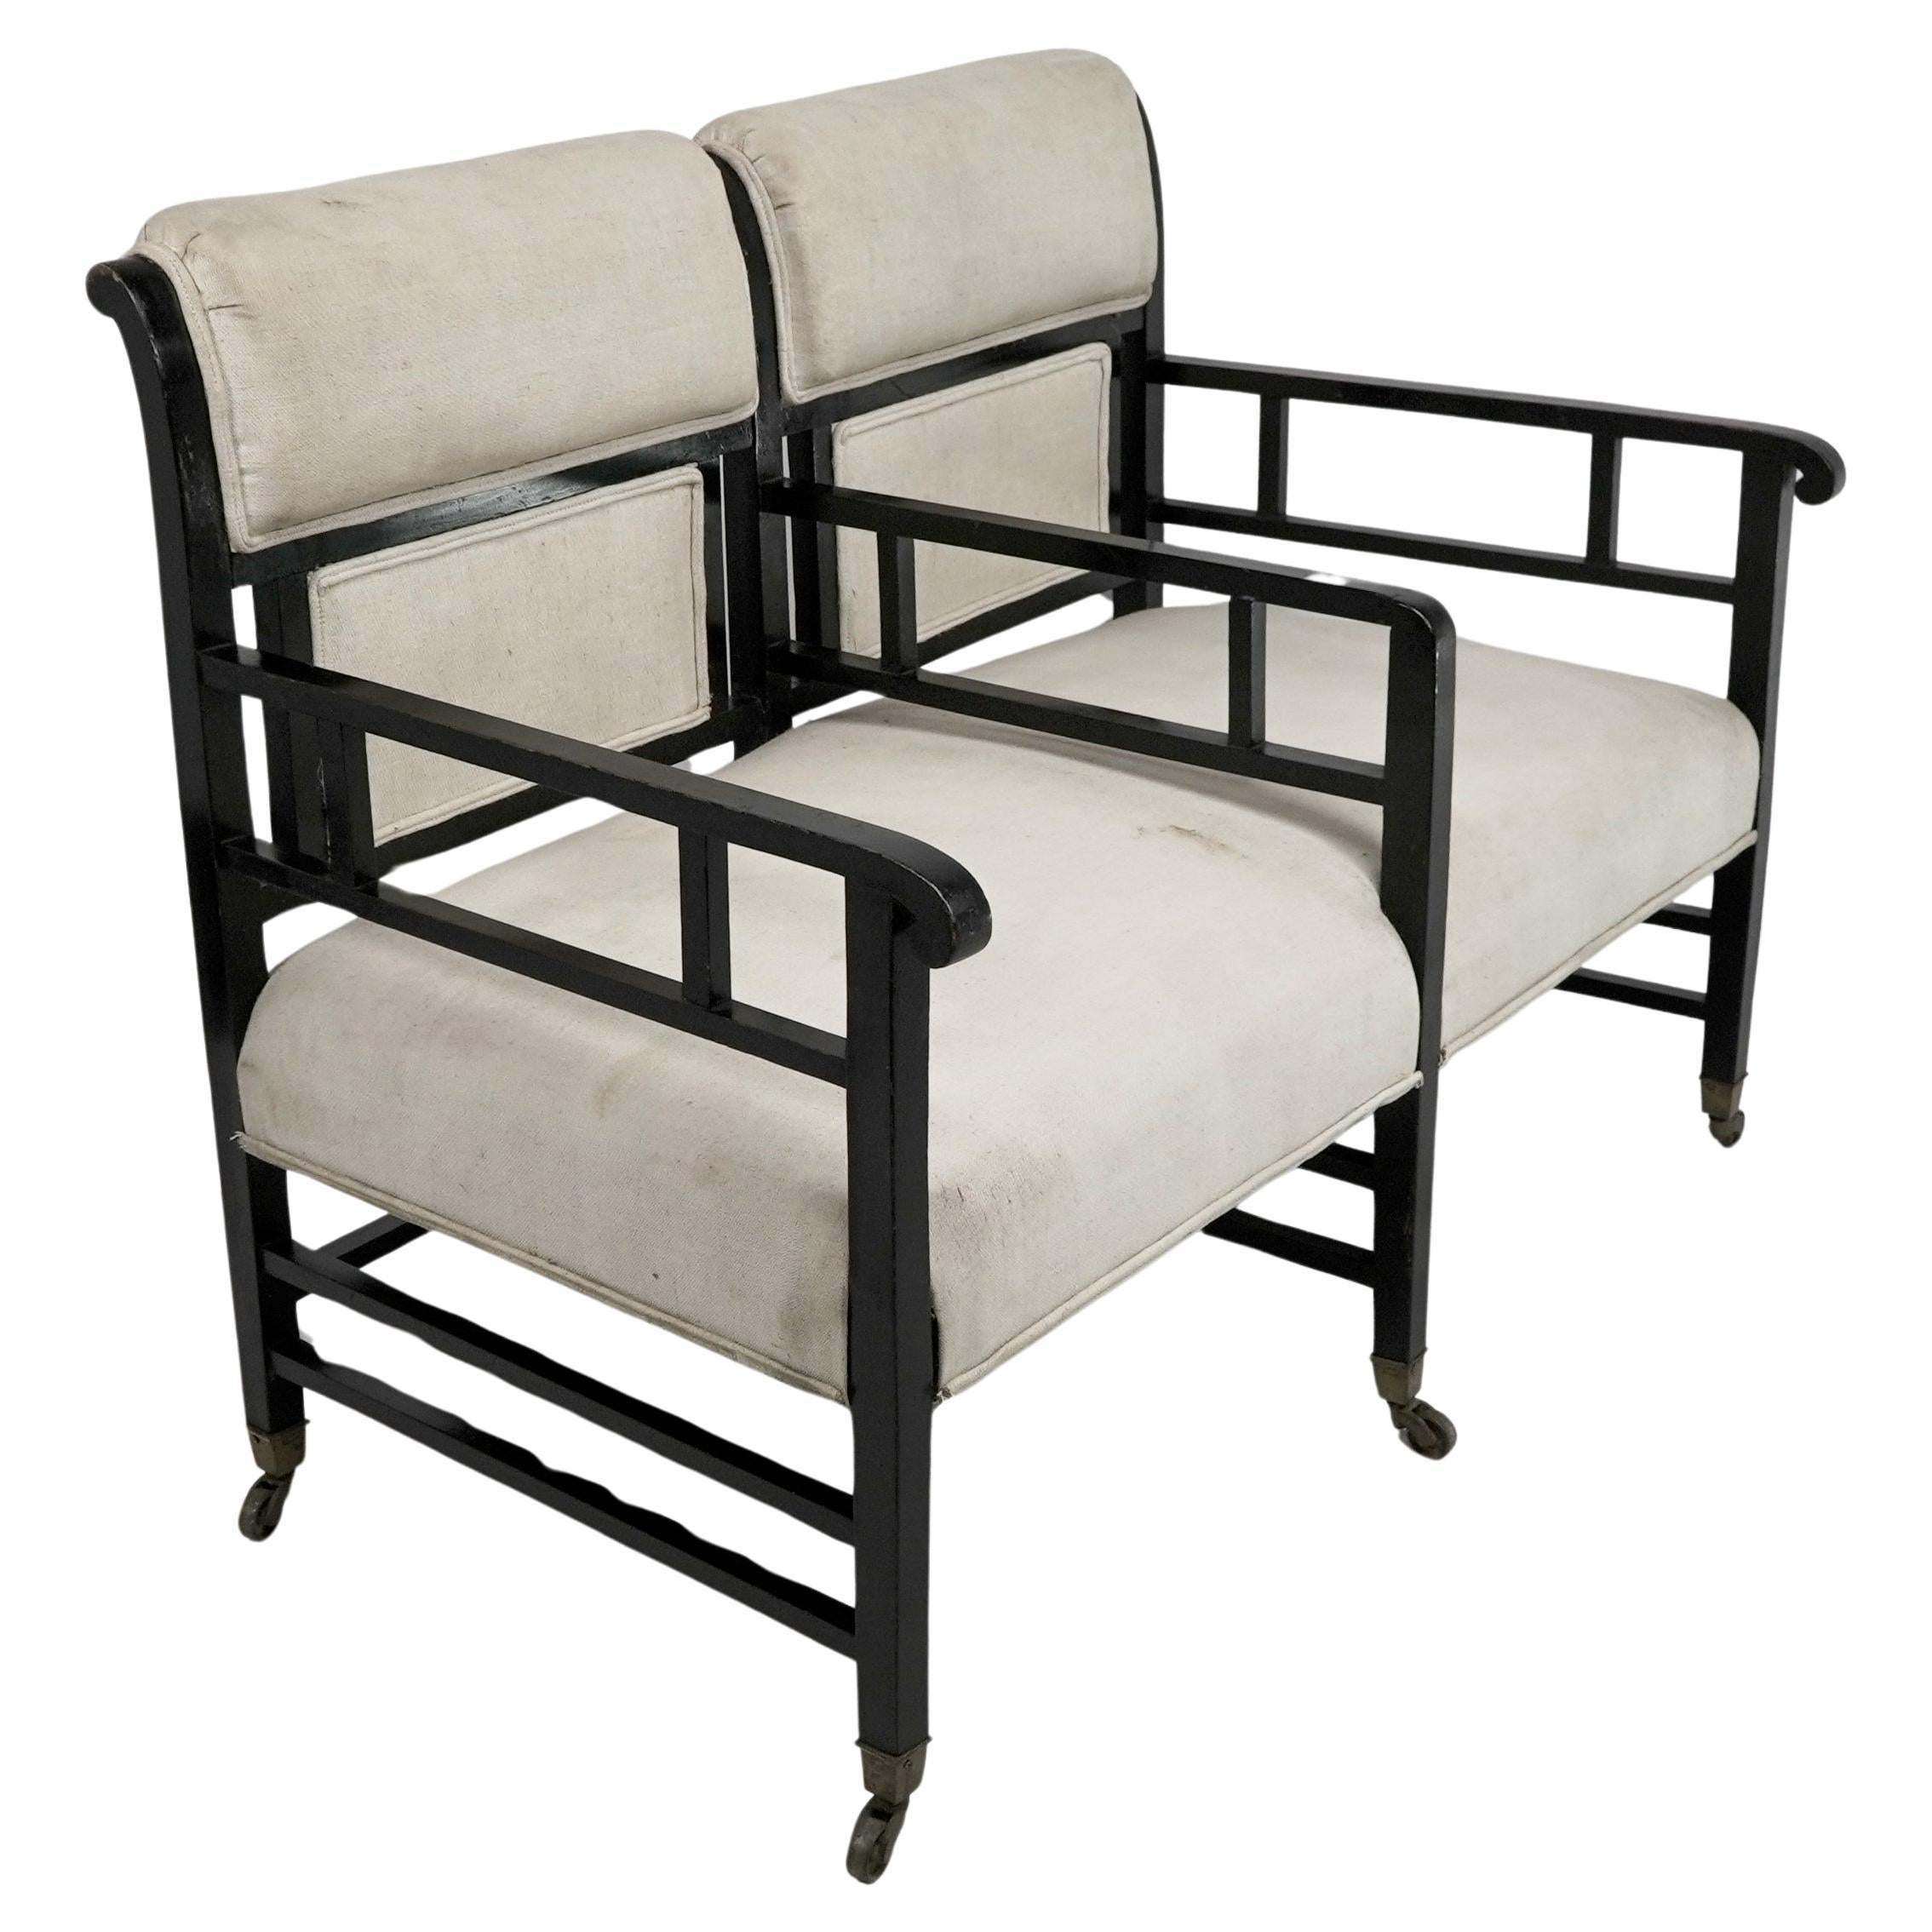 E W Godwin (attributed). An Anglo-Japanese ebonized duet or conversation settee. For Sale